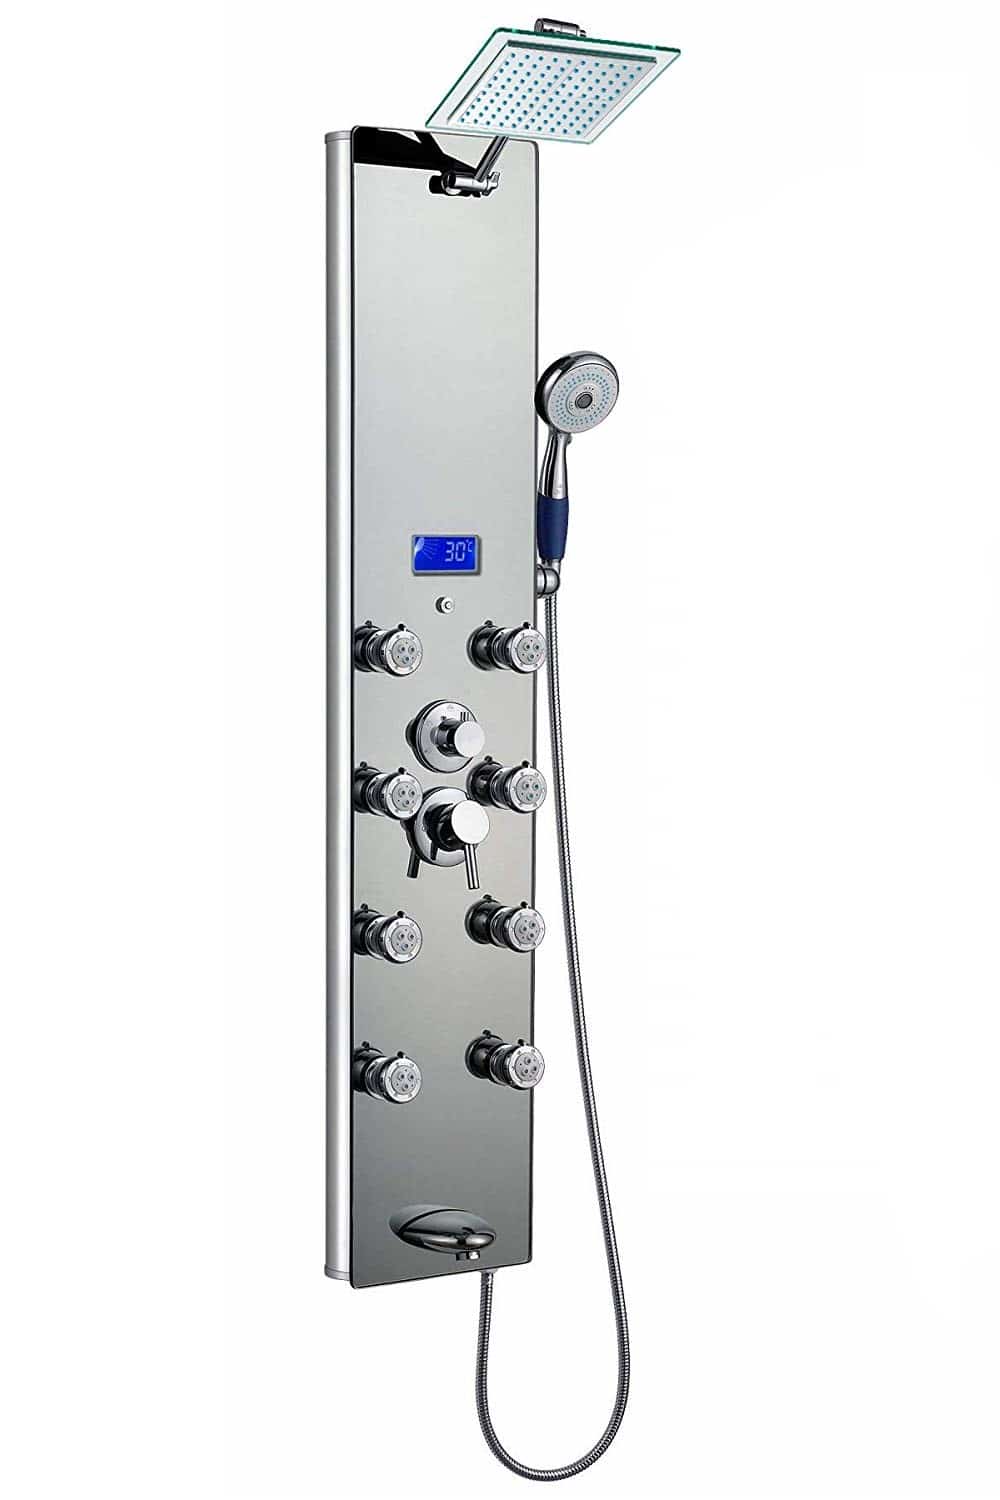 Blue Ocean SPA392M Shower Panel Tower with Rainfall Shower Head